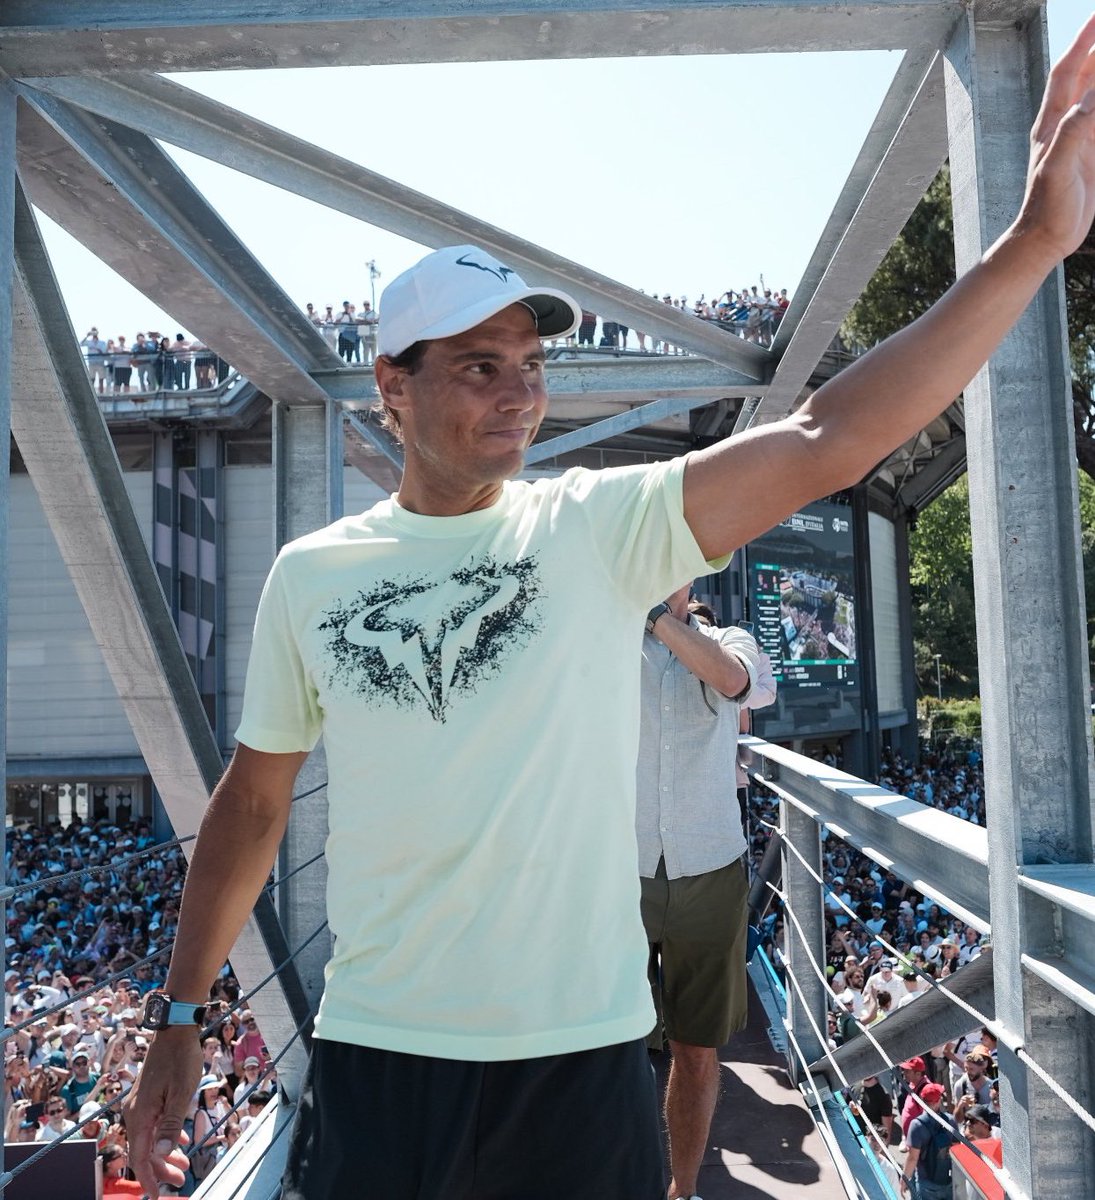 Rafa Nadal says as a tennis player, he wants to be remembered for his results, as a person, he wants to be remembered for being a respectful, good person “For a person like you, after so many years here, so many years all around the world, what it means, what do you feel when…